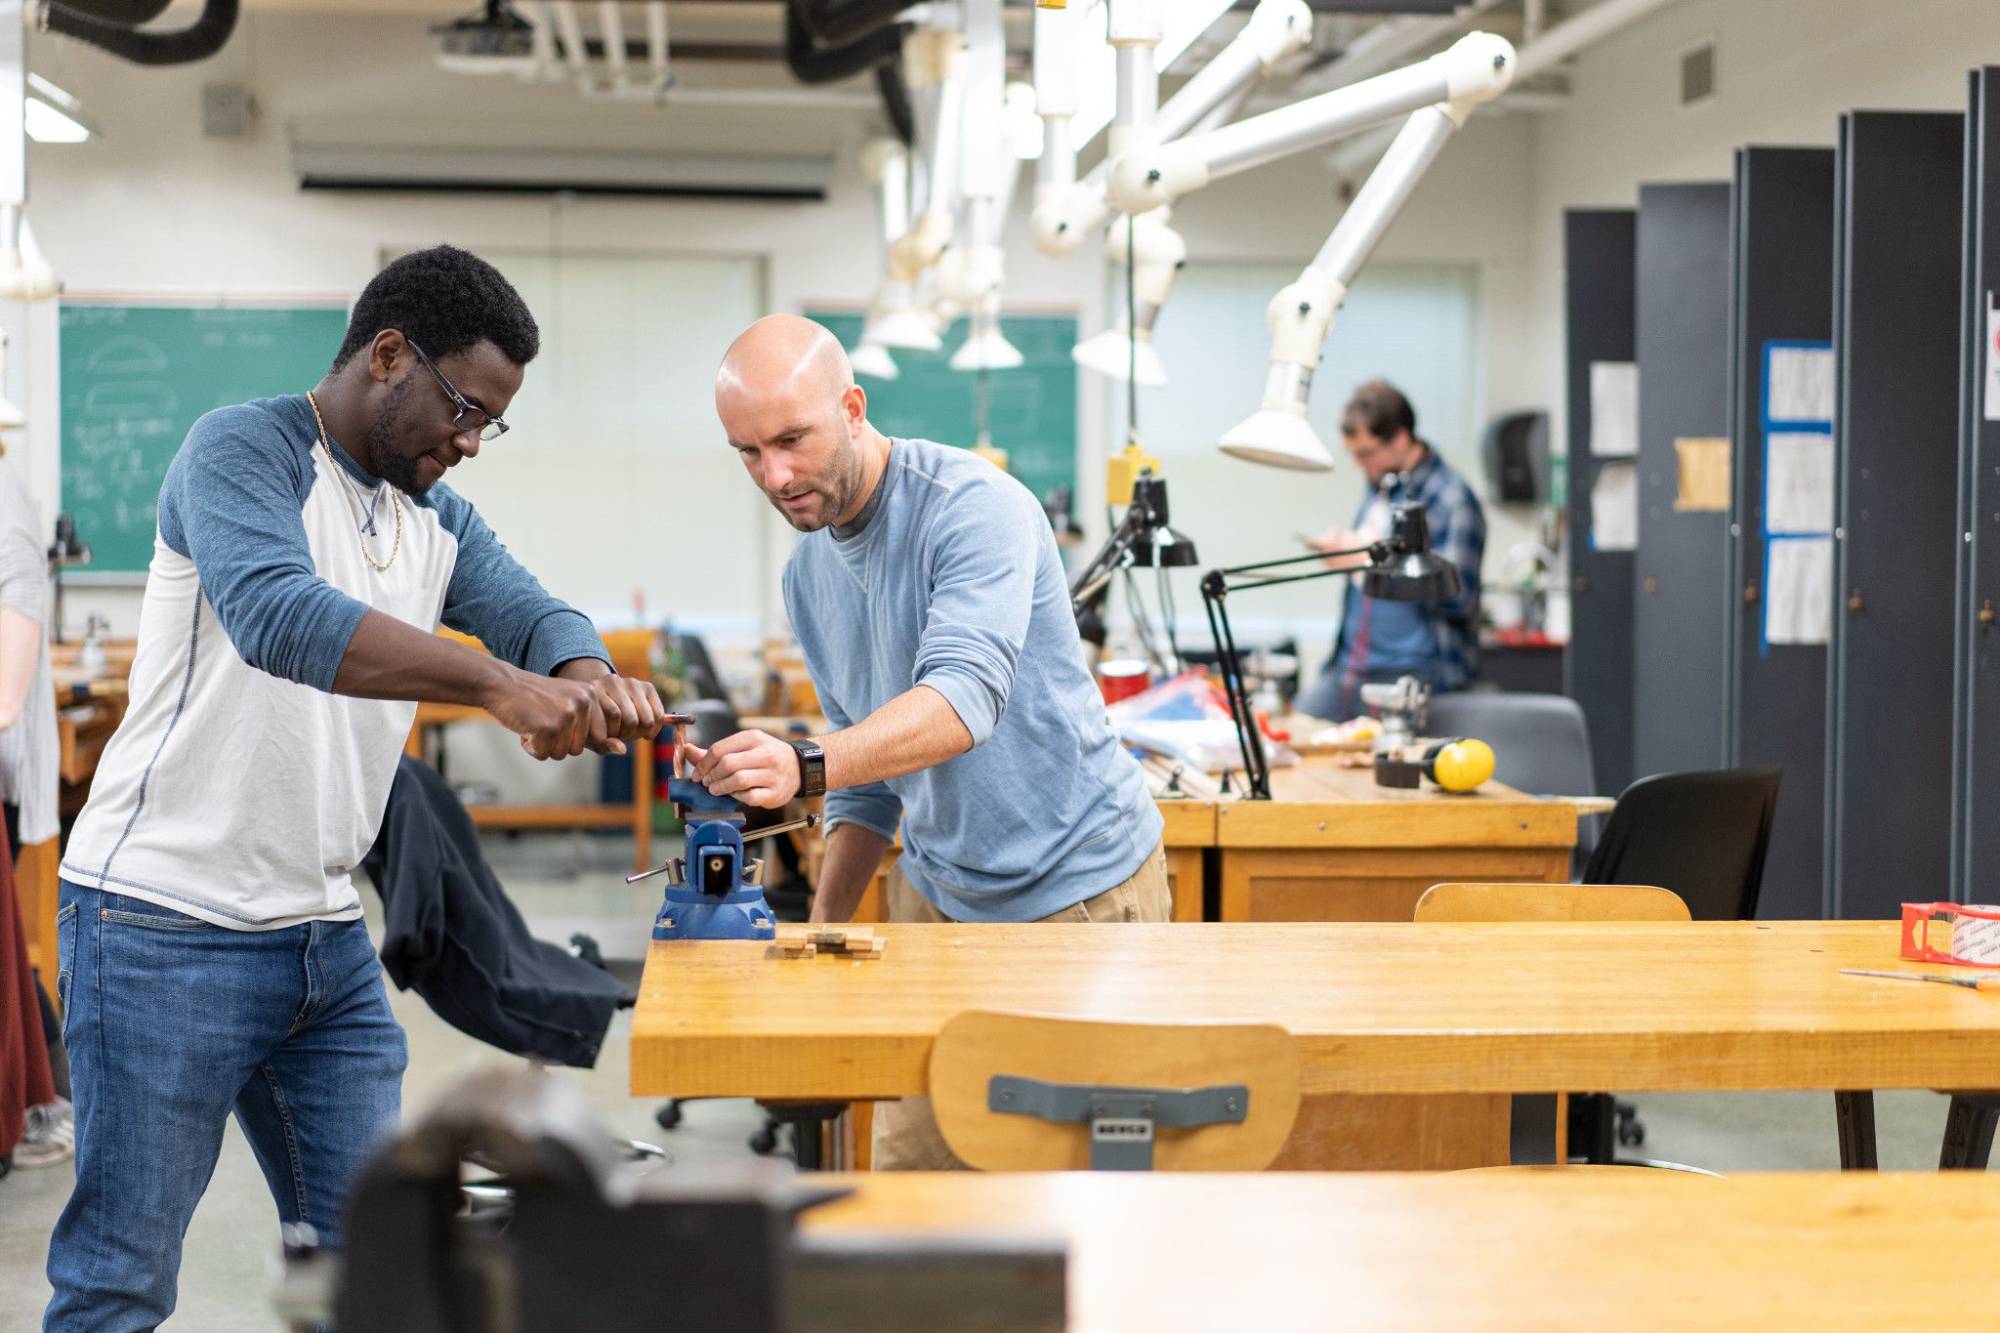 Image of a Black male student using equipment with the professor, Peter Antor, in a jewelry-making workshop. In the background there is more equipment and a young white male student.